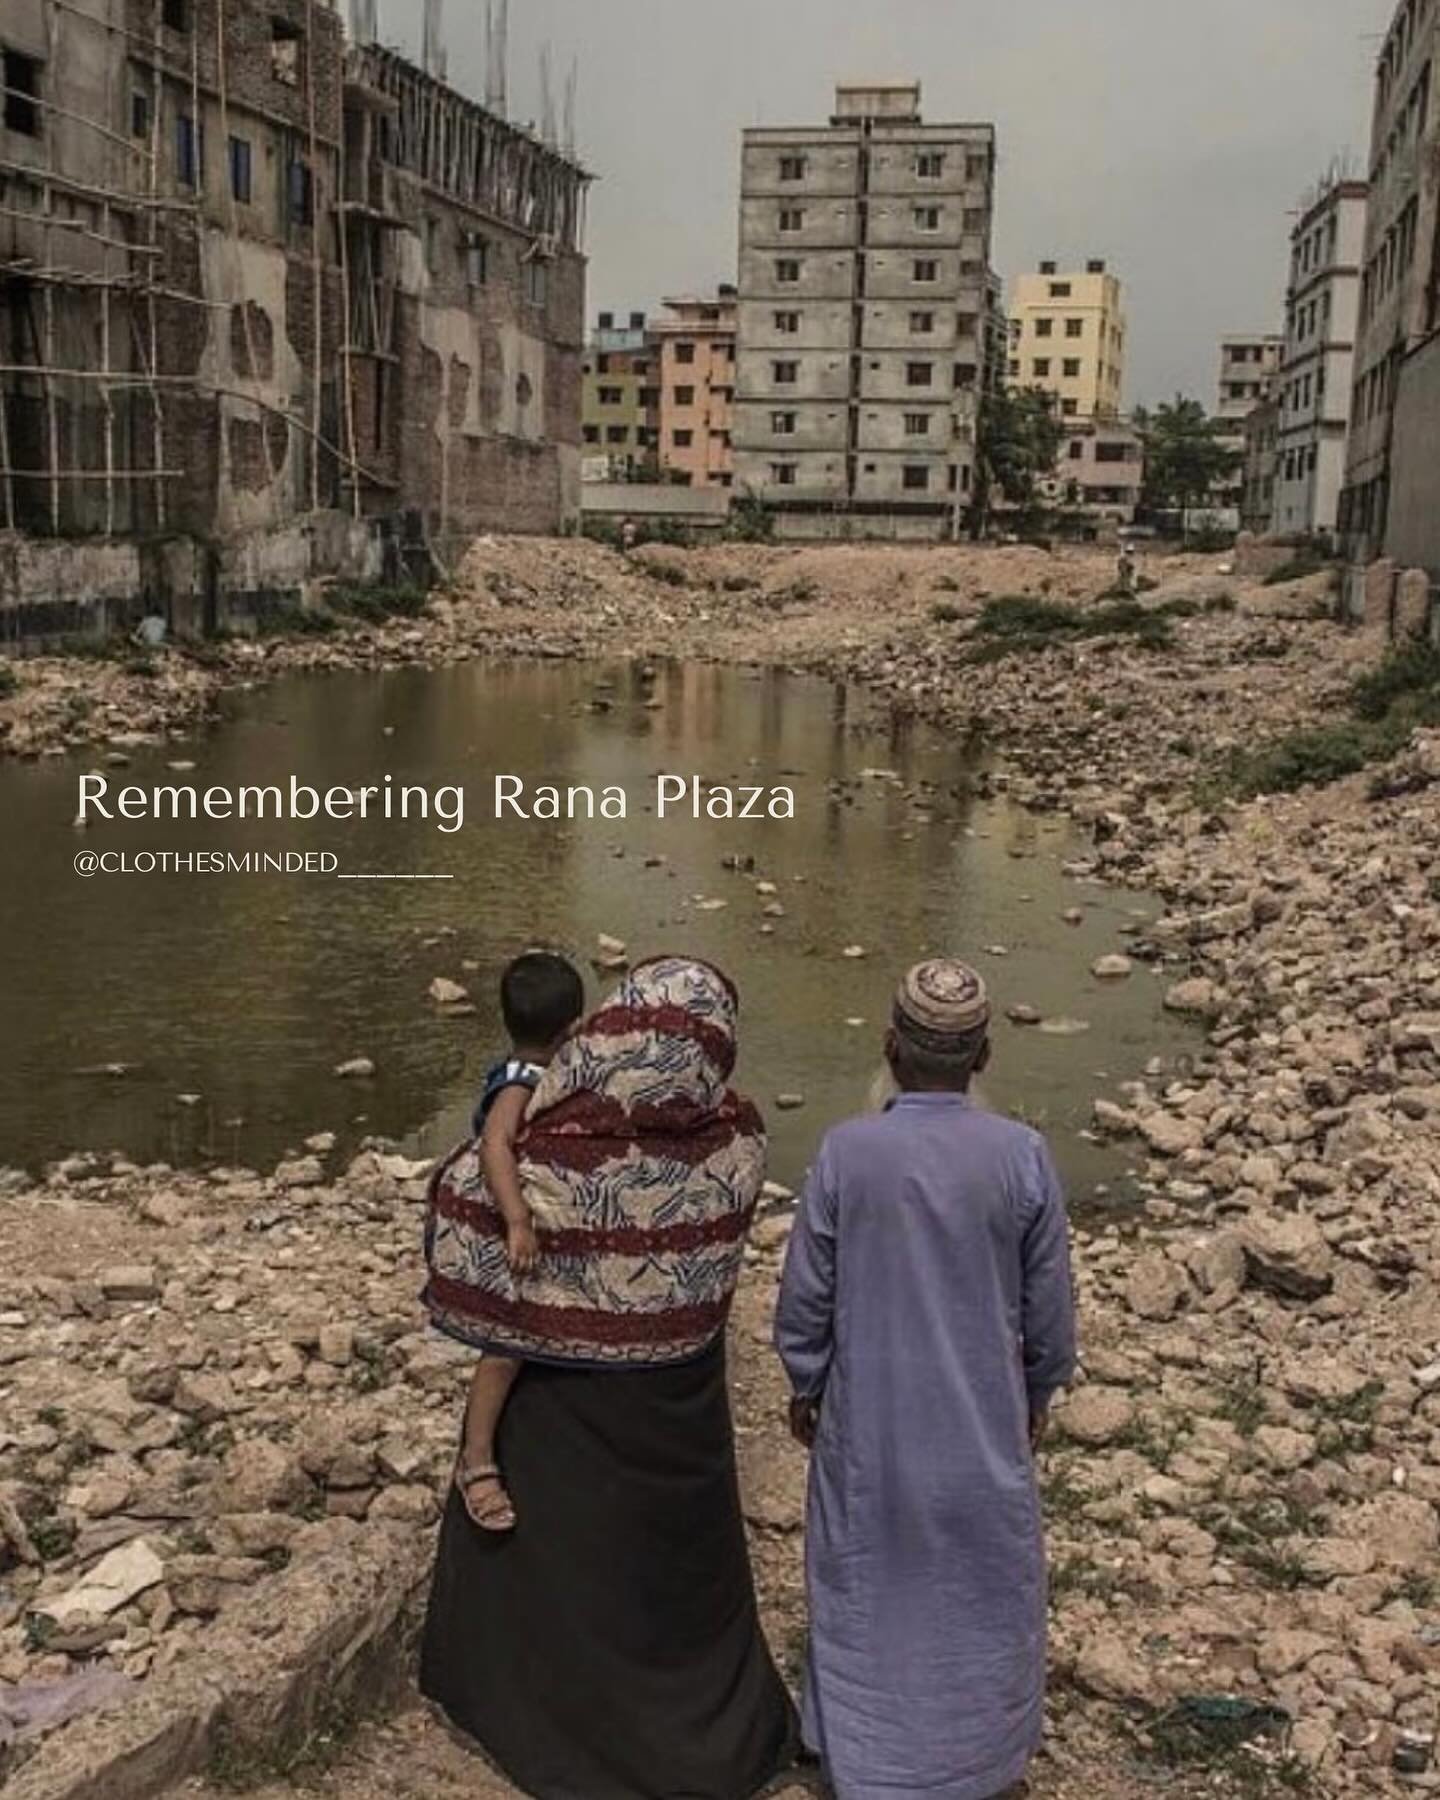 No one should die in the name of fashion.

Eleven years ago today, on April 24, 2013, the collapse of the Rana Plaza building in Dhaka, Bangladesh killed at least 1,134 people and injured 2,500 in what would become the largest and deadliest industria